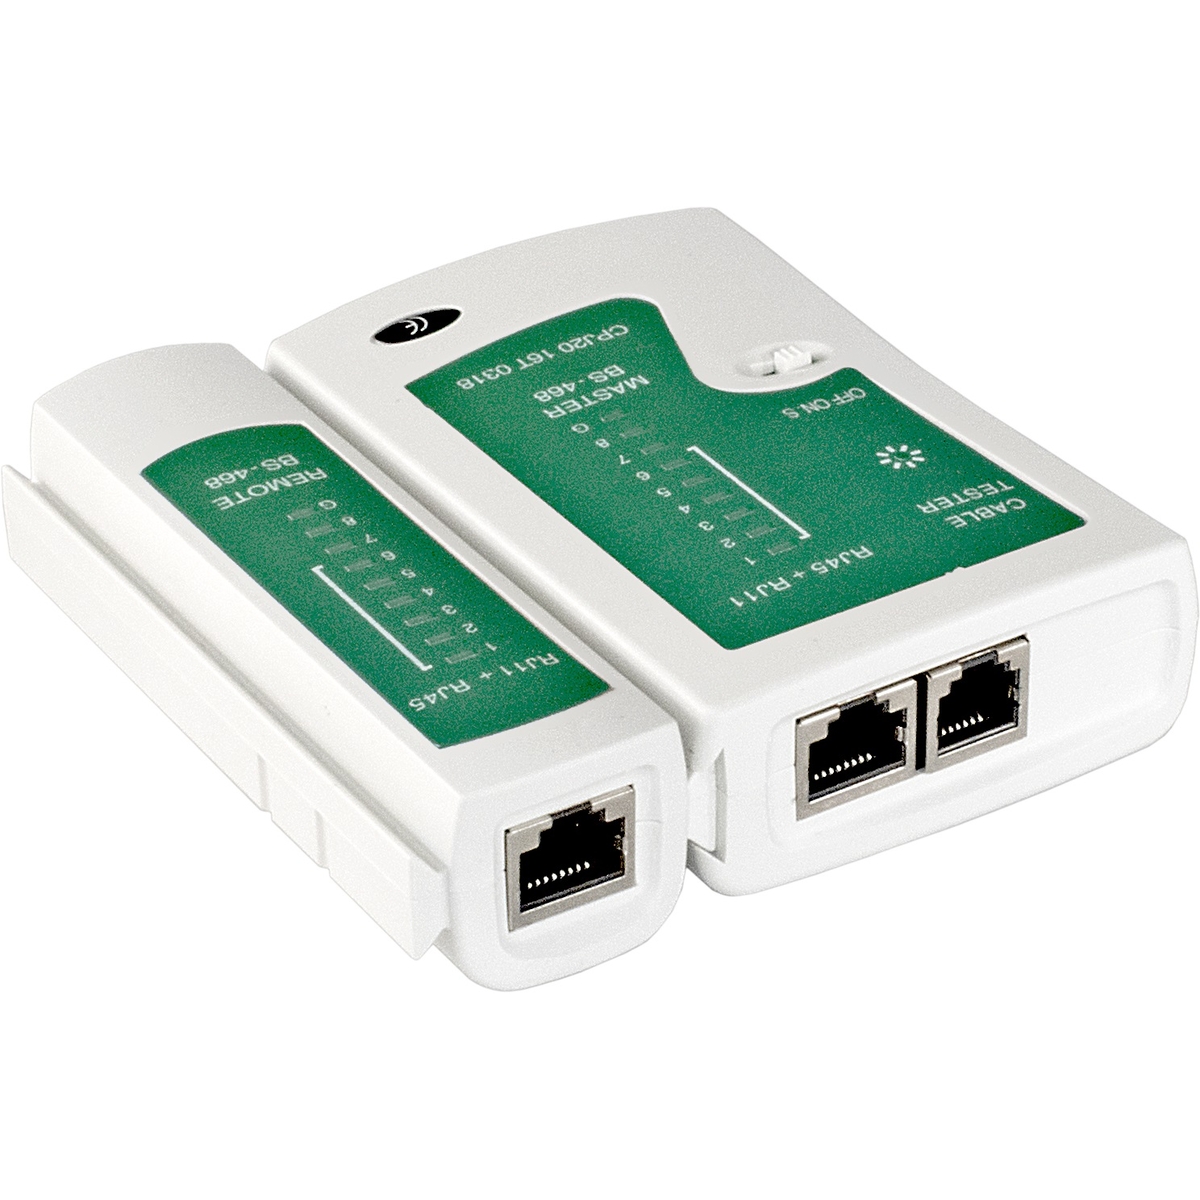 Network Lan Cable Tester Cat 5 / Cat 5e / Cat 6 / UTP cables with RJ-11 RJ-45